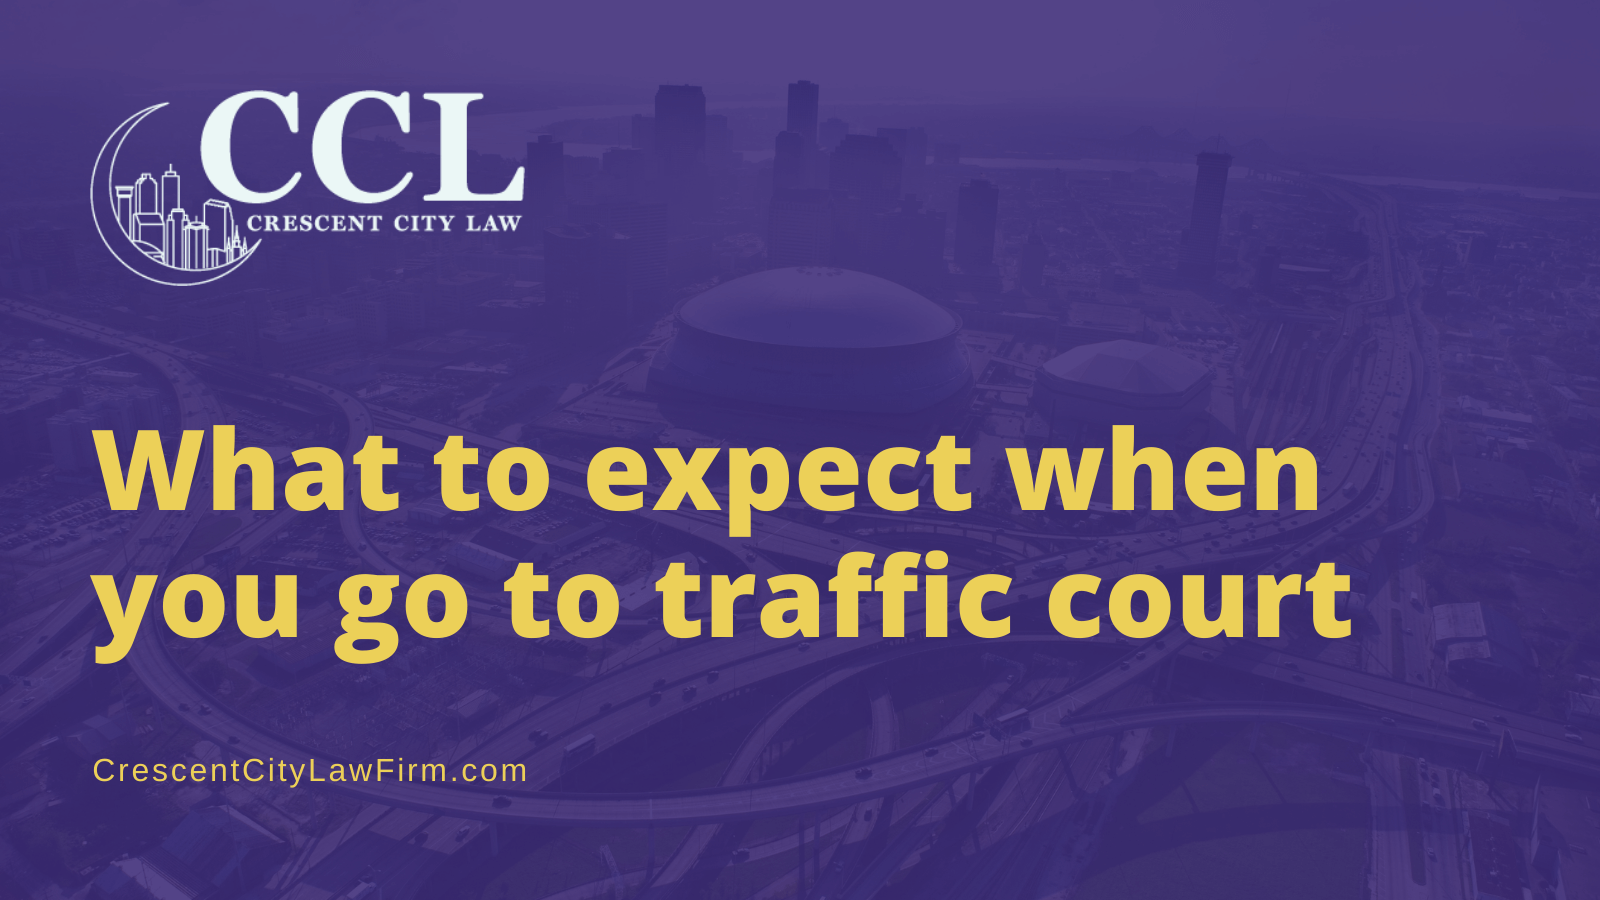 What to expect when you go to traffic court - crescent city law firm - new orleans la